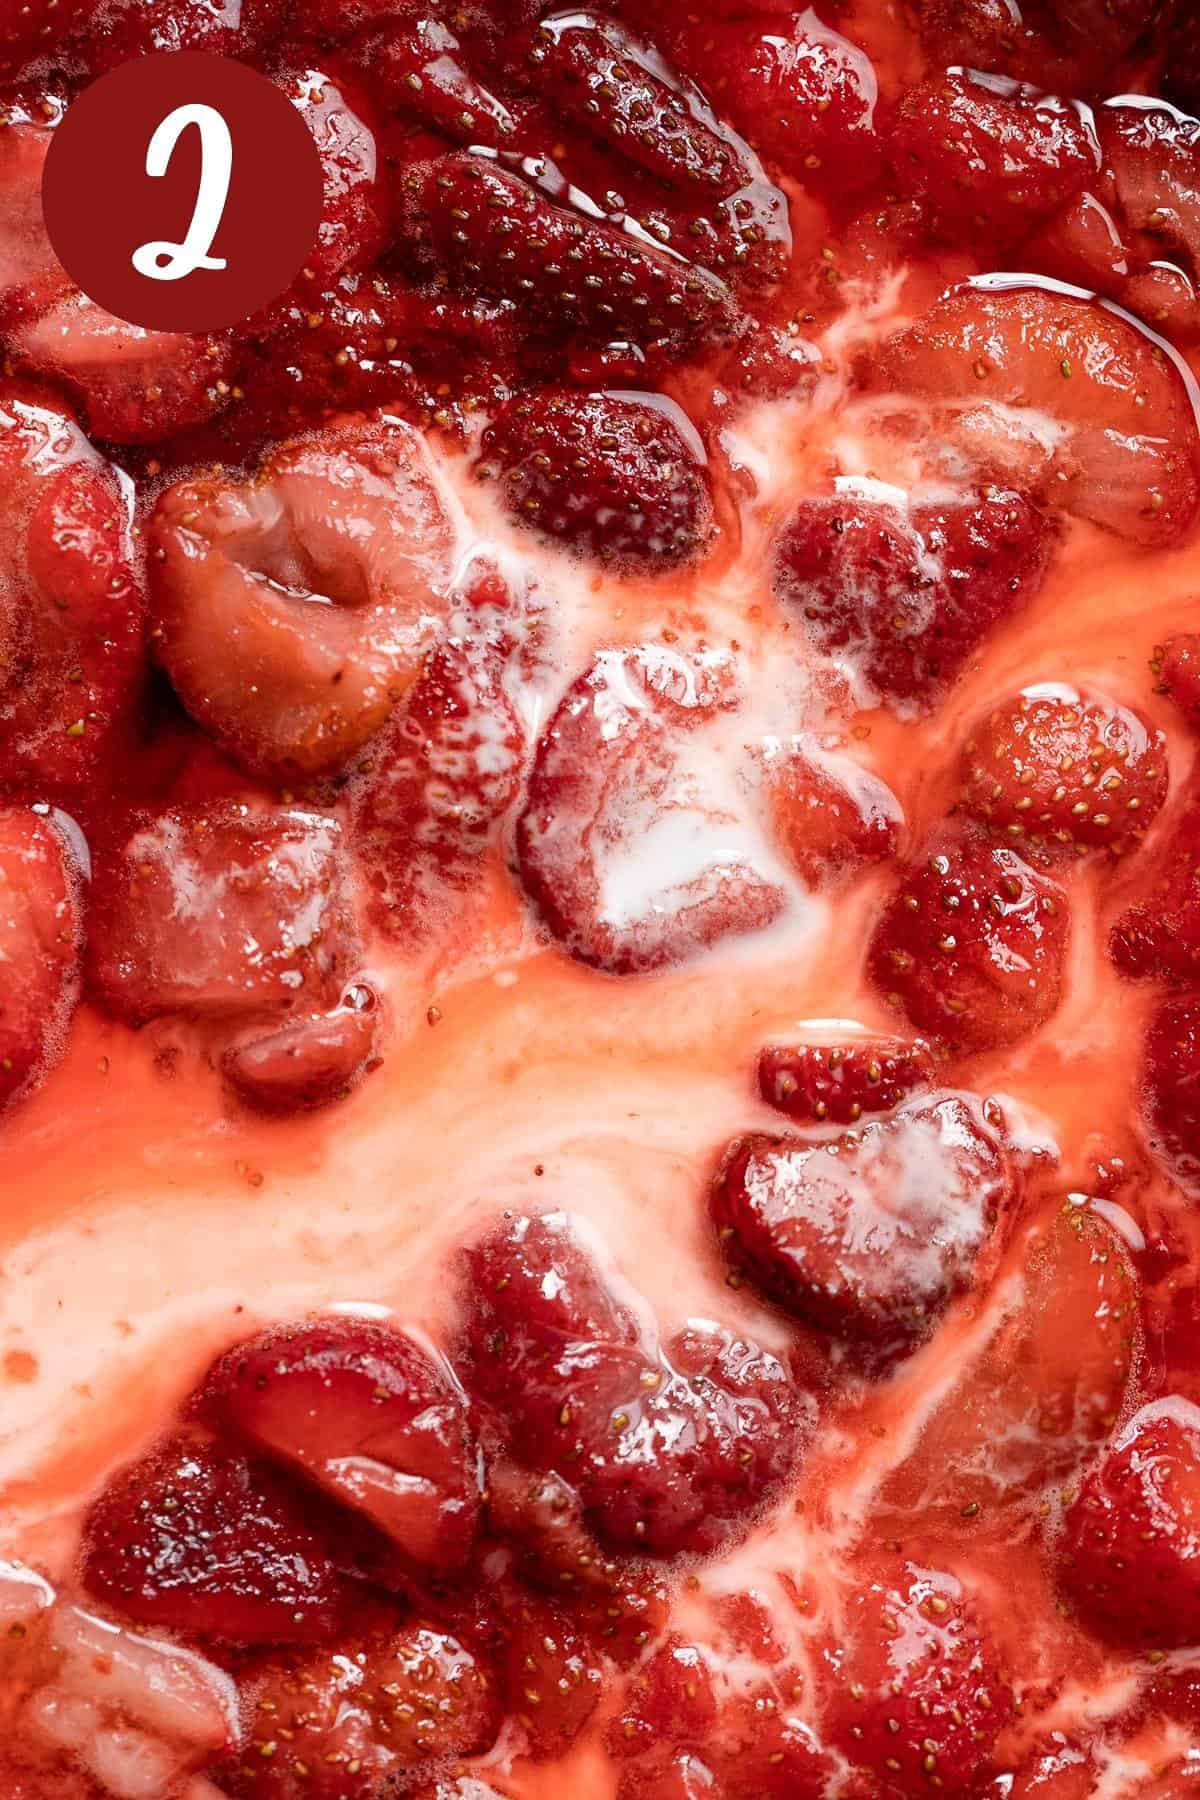 The cornstarch and water mixture mixed in with the strawberry filling, cooking on a pan.